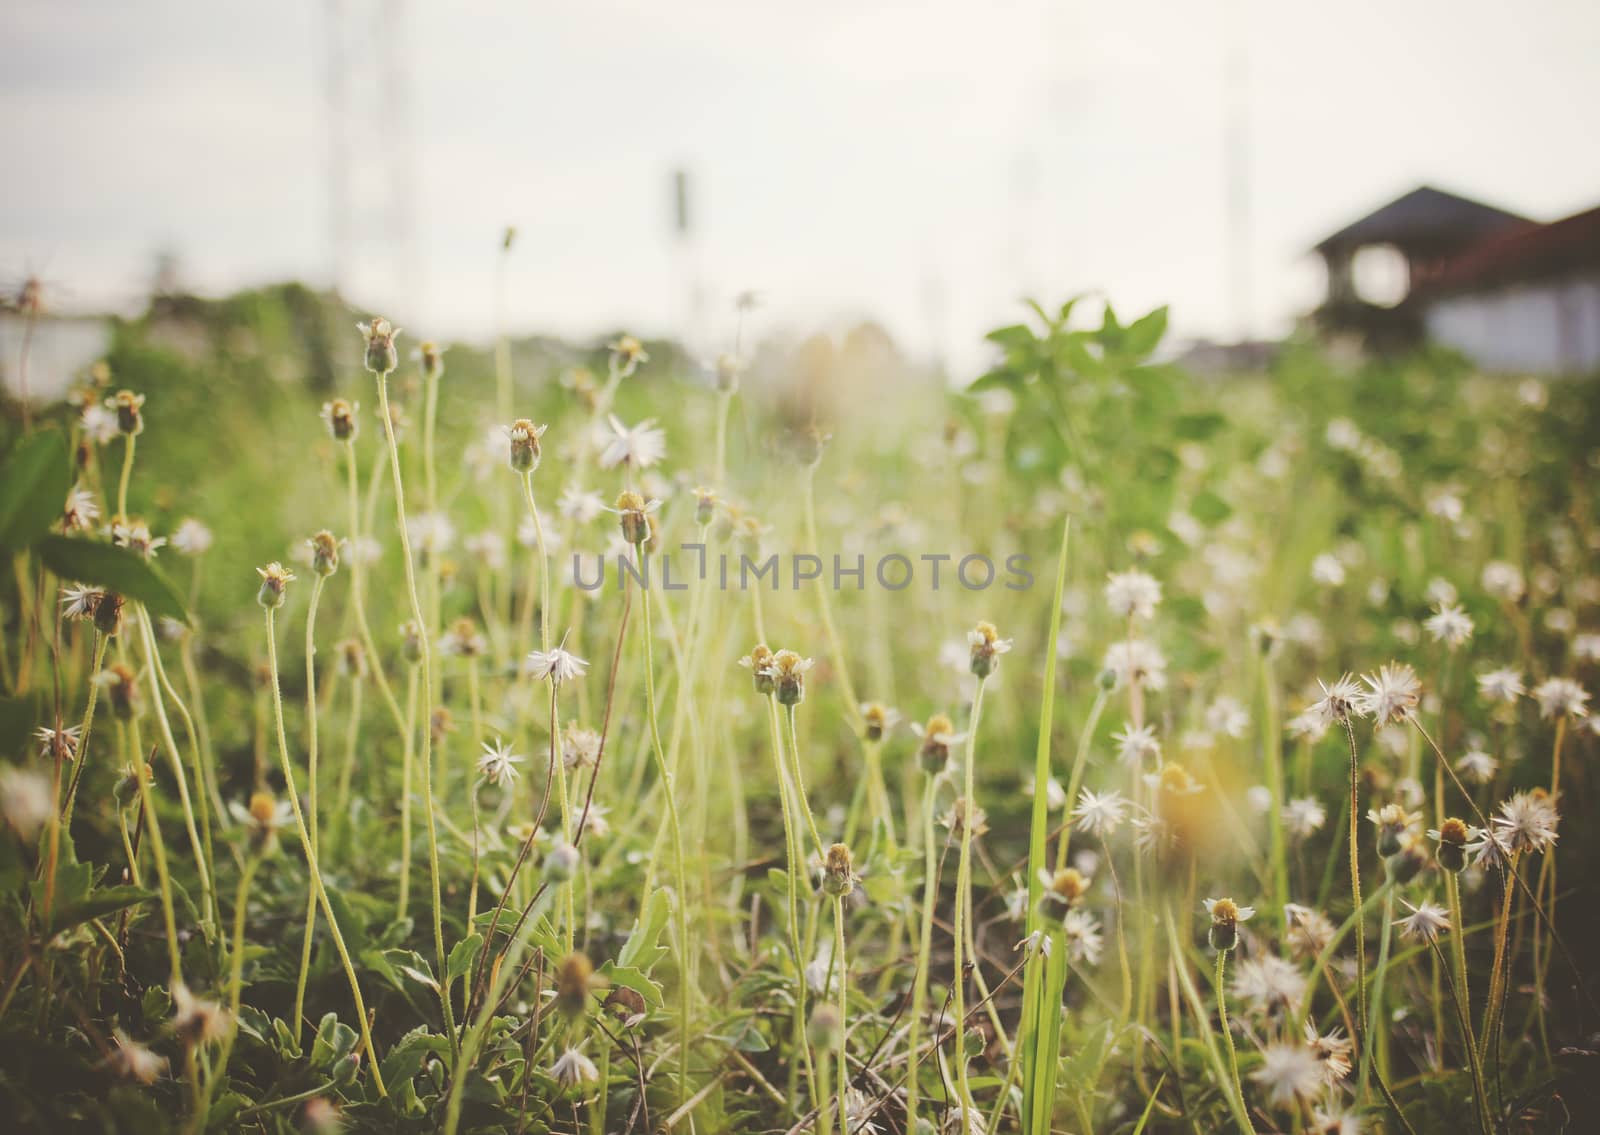 Dry meadow flowers with retro filter effect